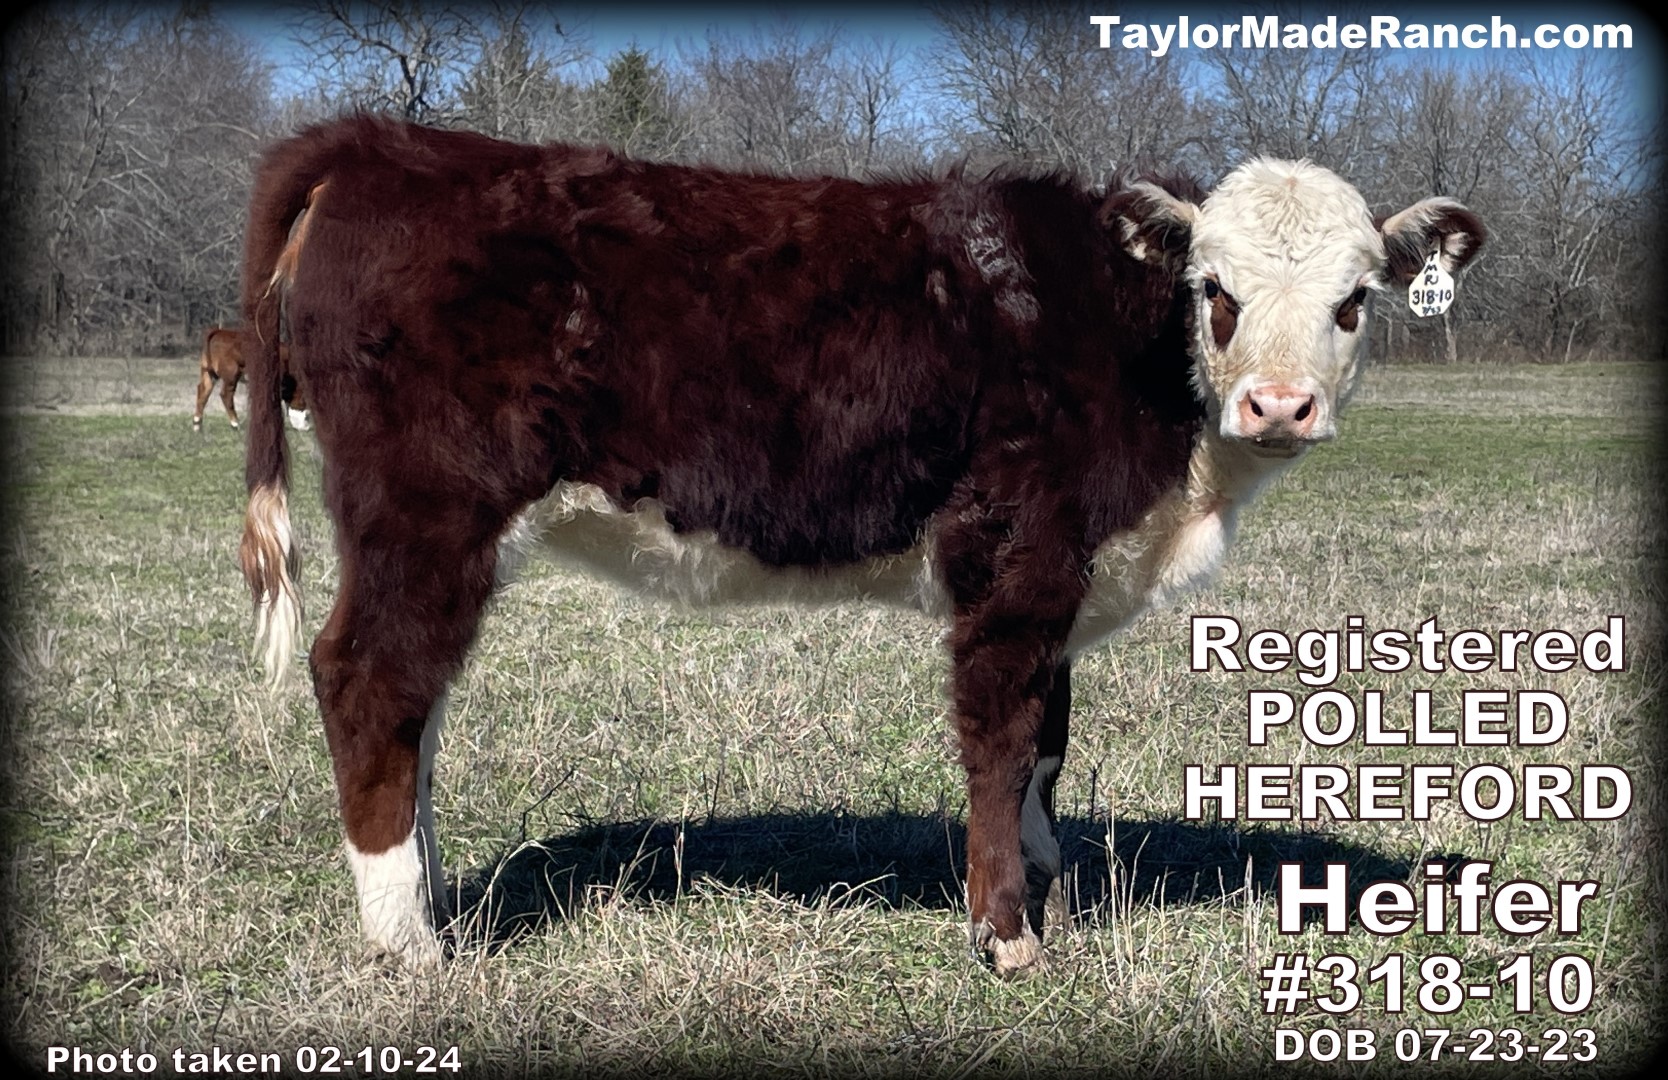 Registered Polled Hereford heifer calves for sale in Northeast Texas #TaylorMadeRanch